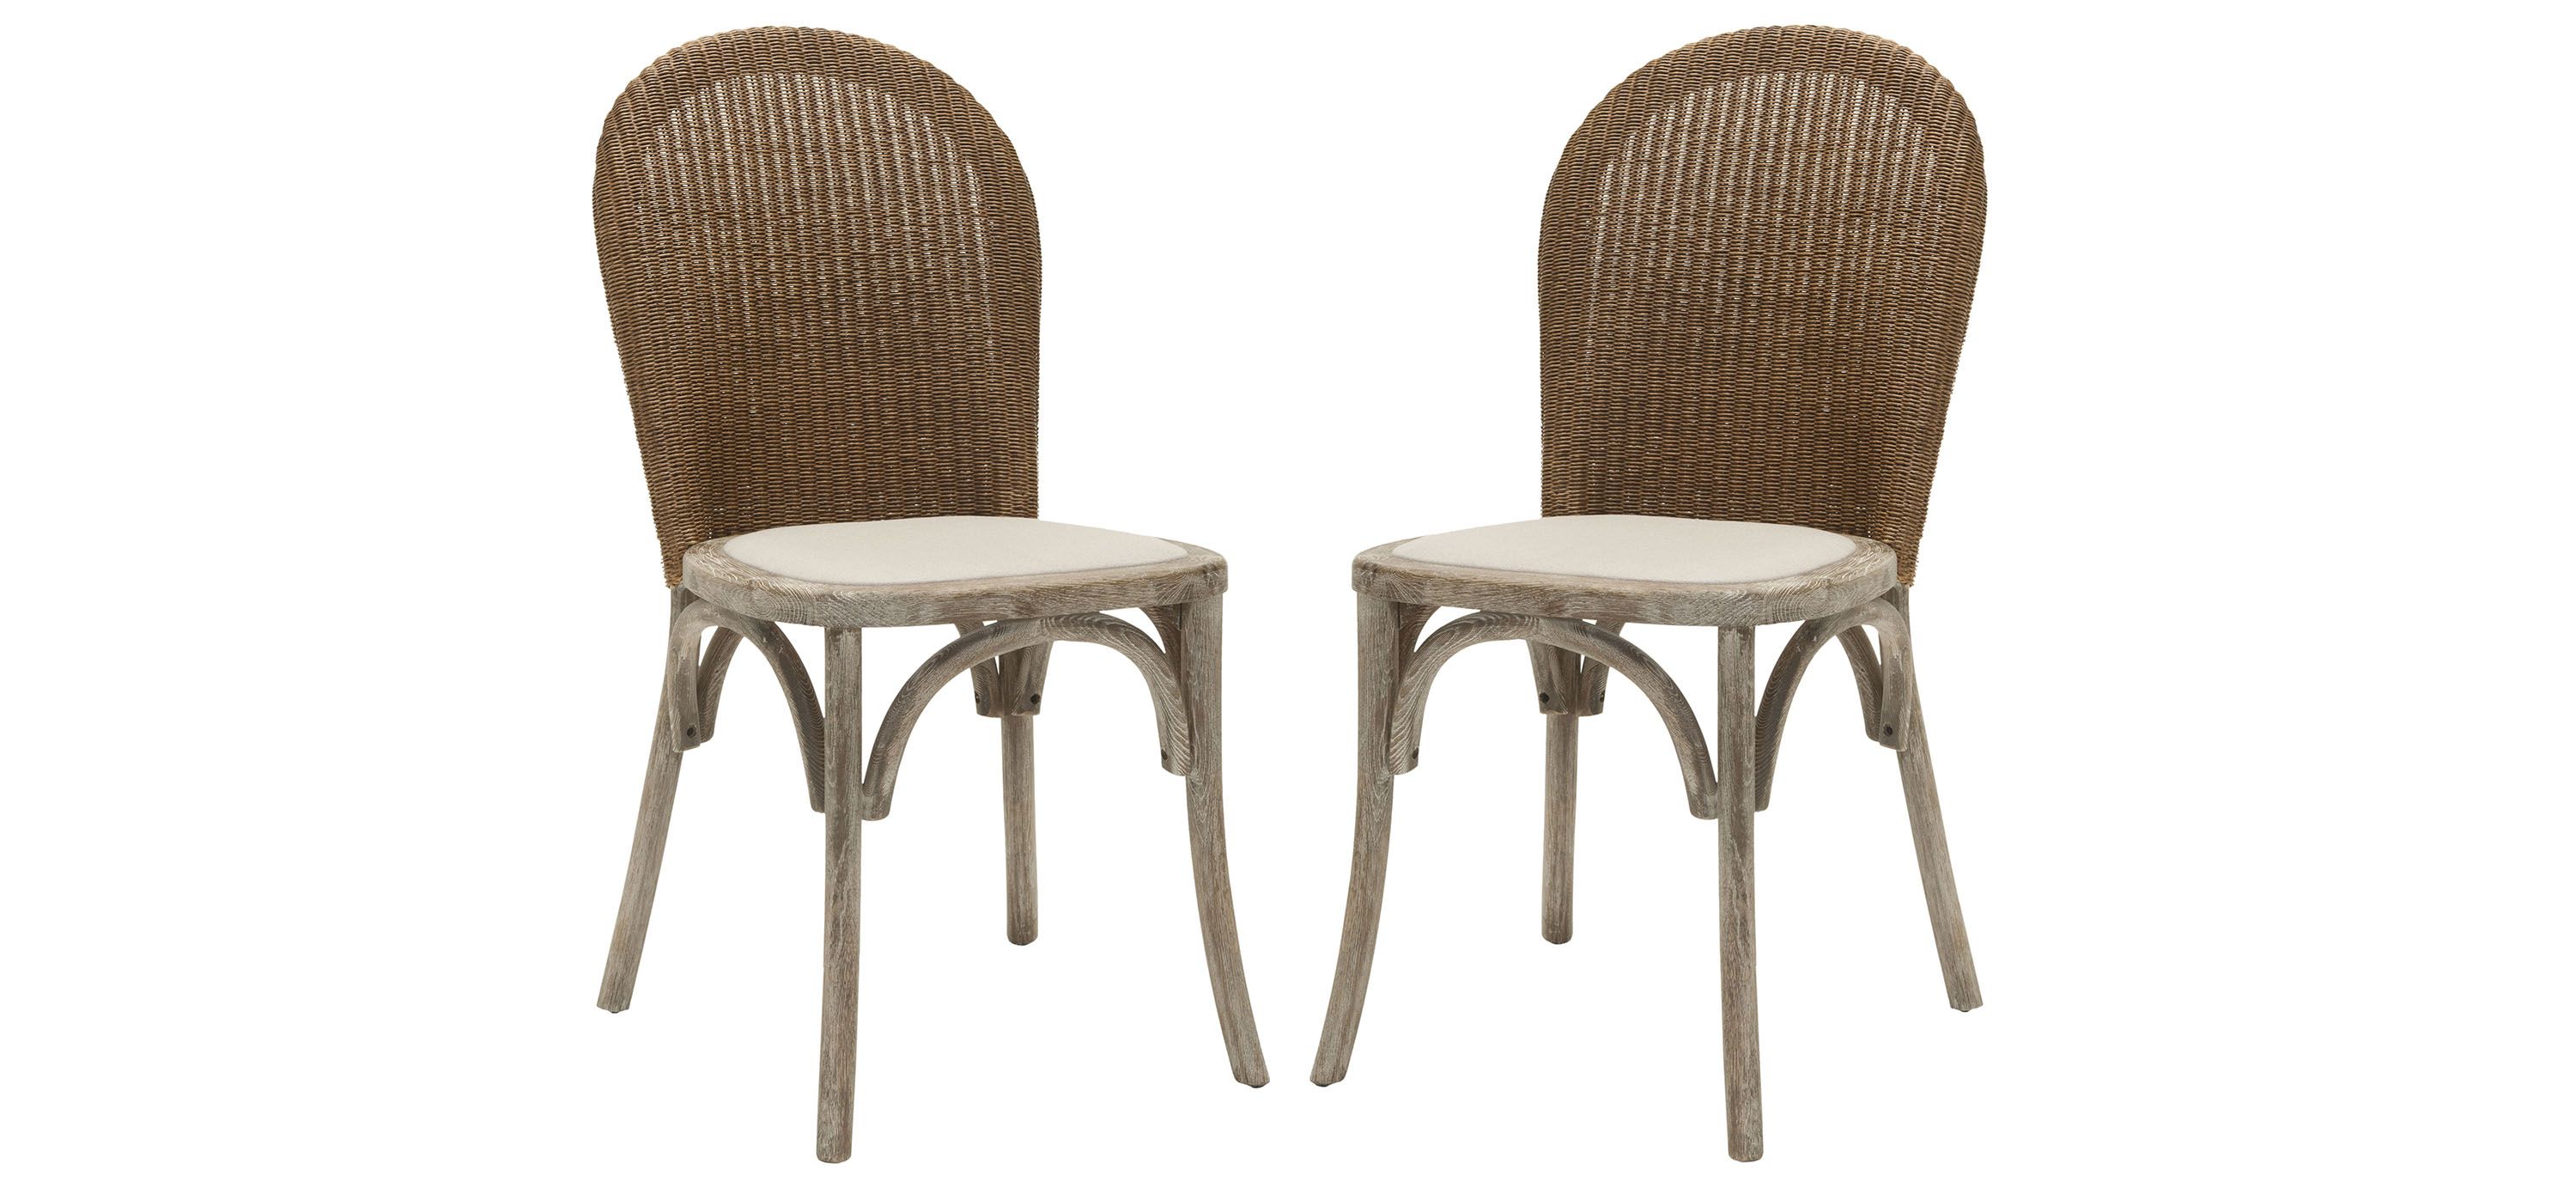 Tory Rattan Dining Chair - Set of 2